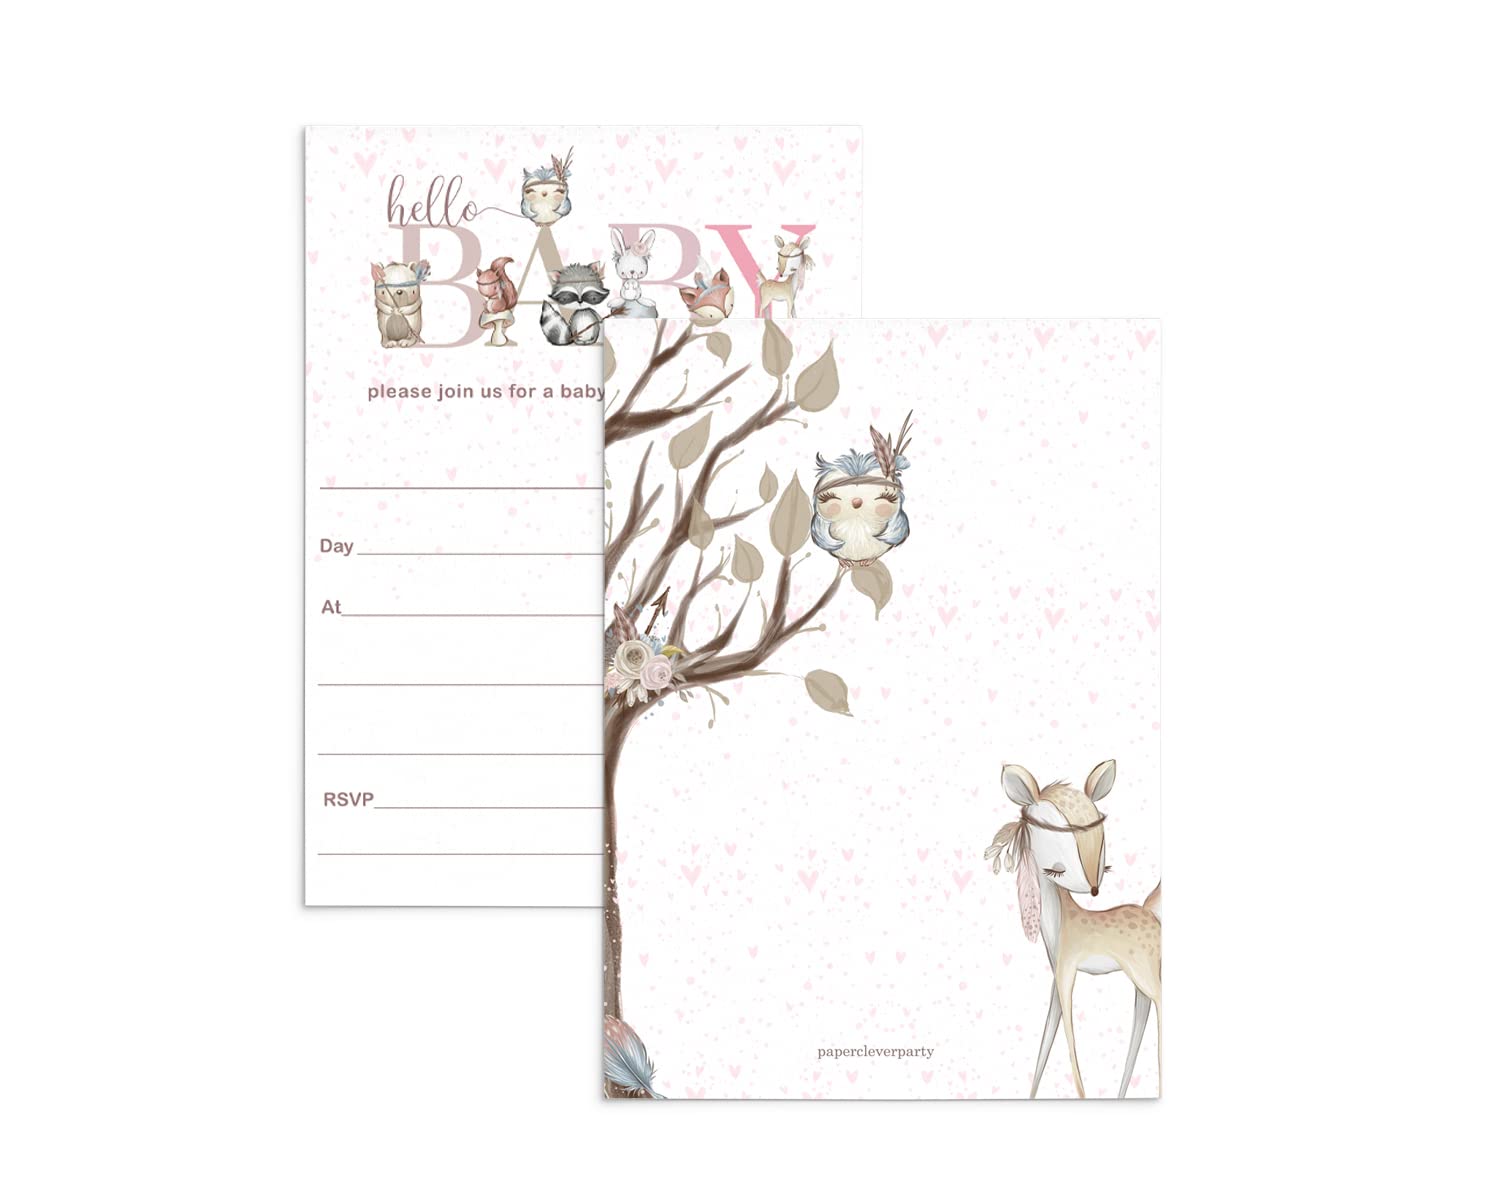 Woodland Friends Invitations with Envelopes (25 Pack) Baby Shower Invitation for Girls Pink, Rustic, Floral or Animal Event Theme – Printed Blank Invites to Handwrite Party Details DIY